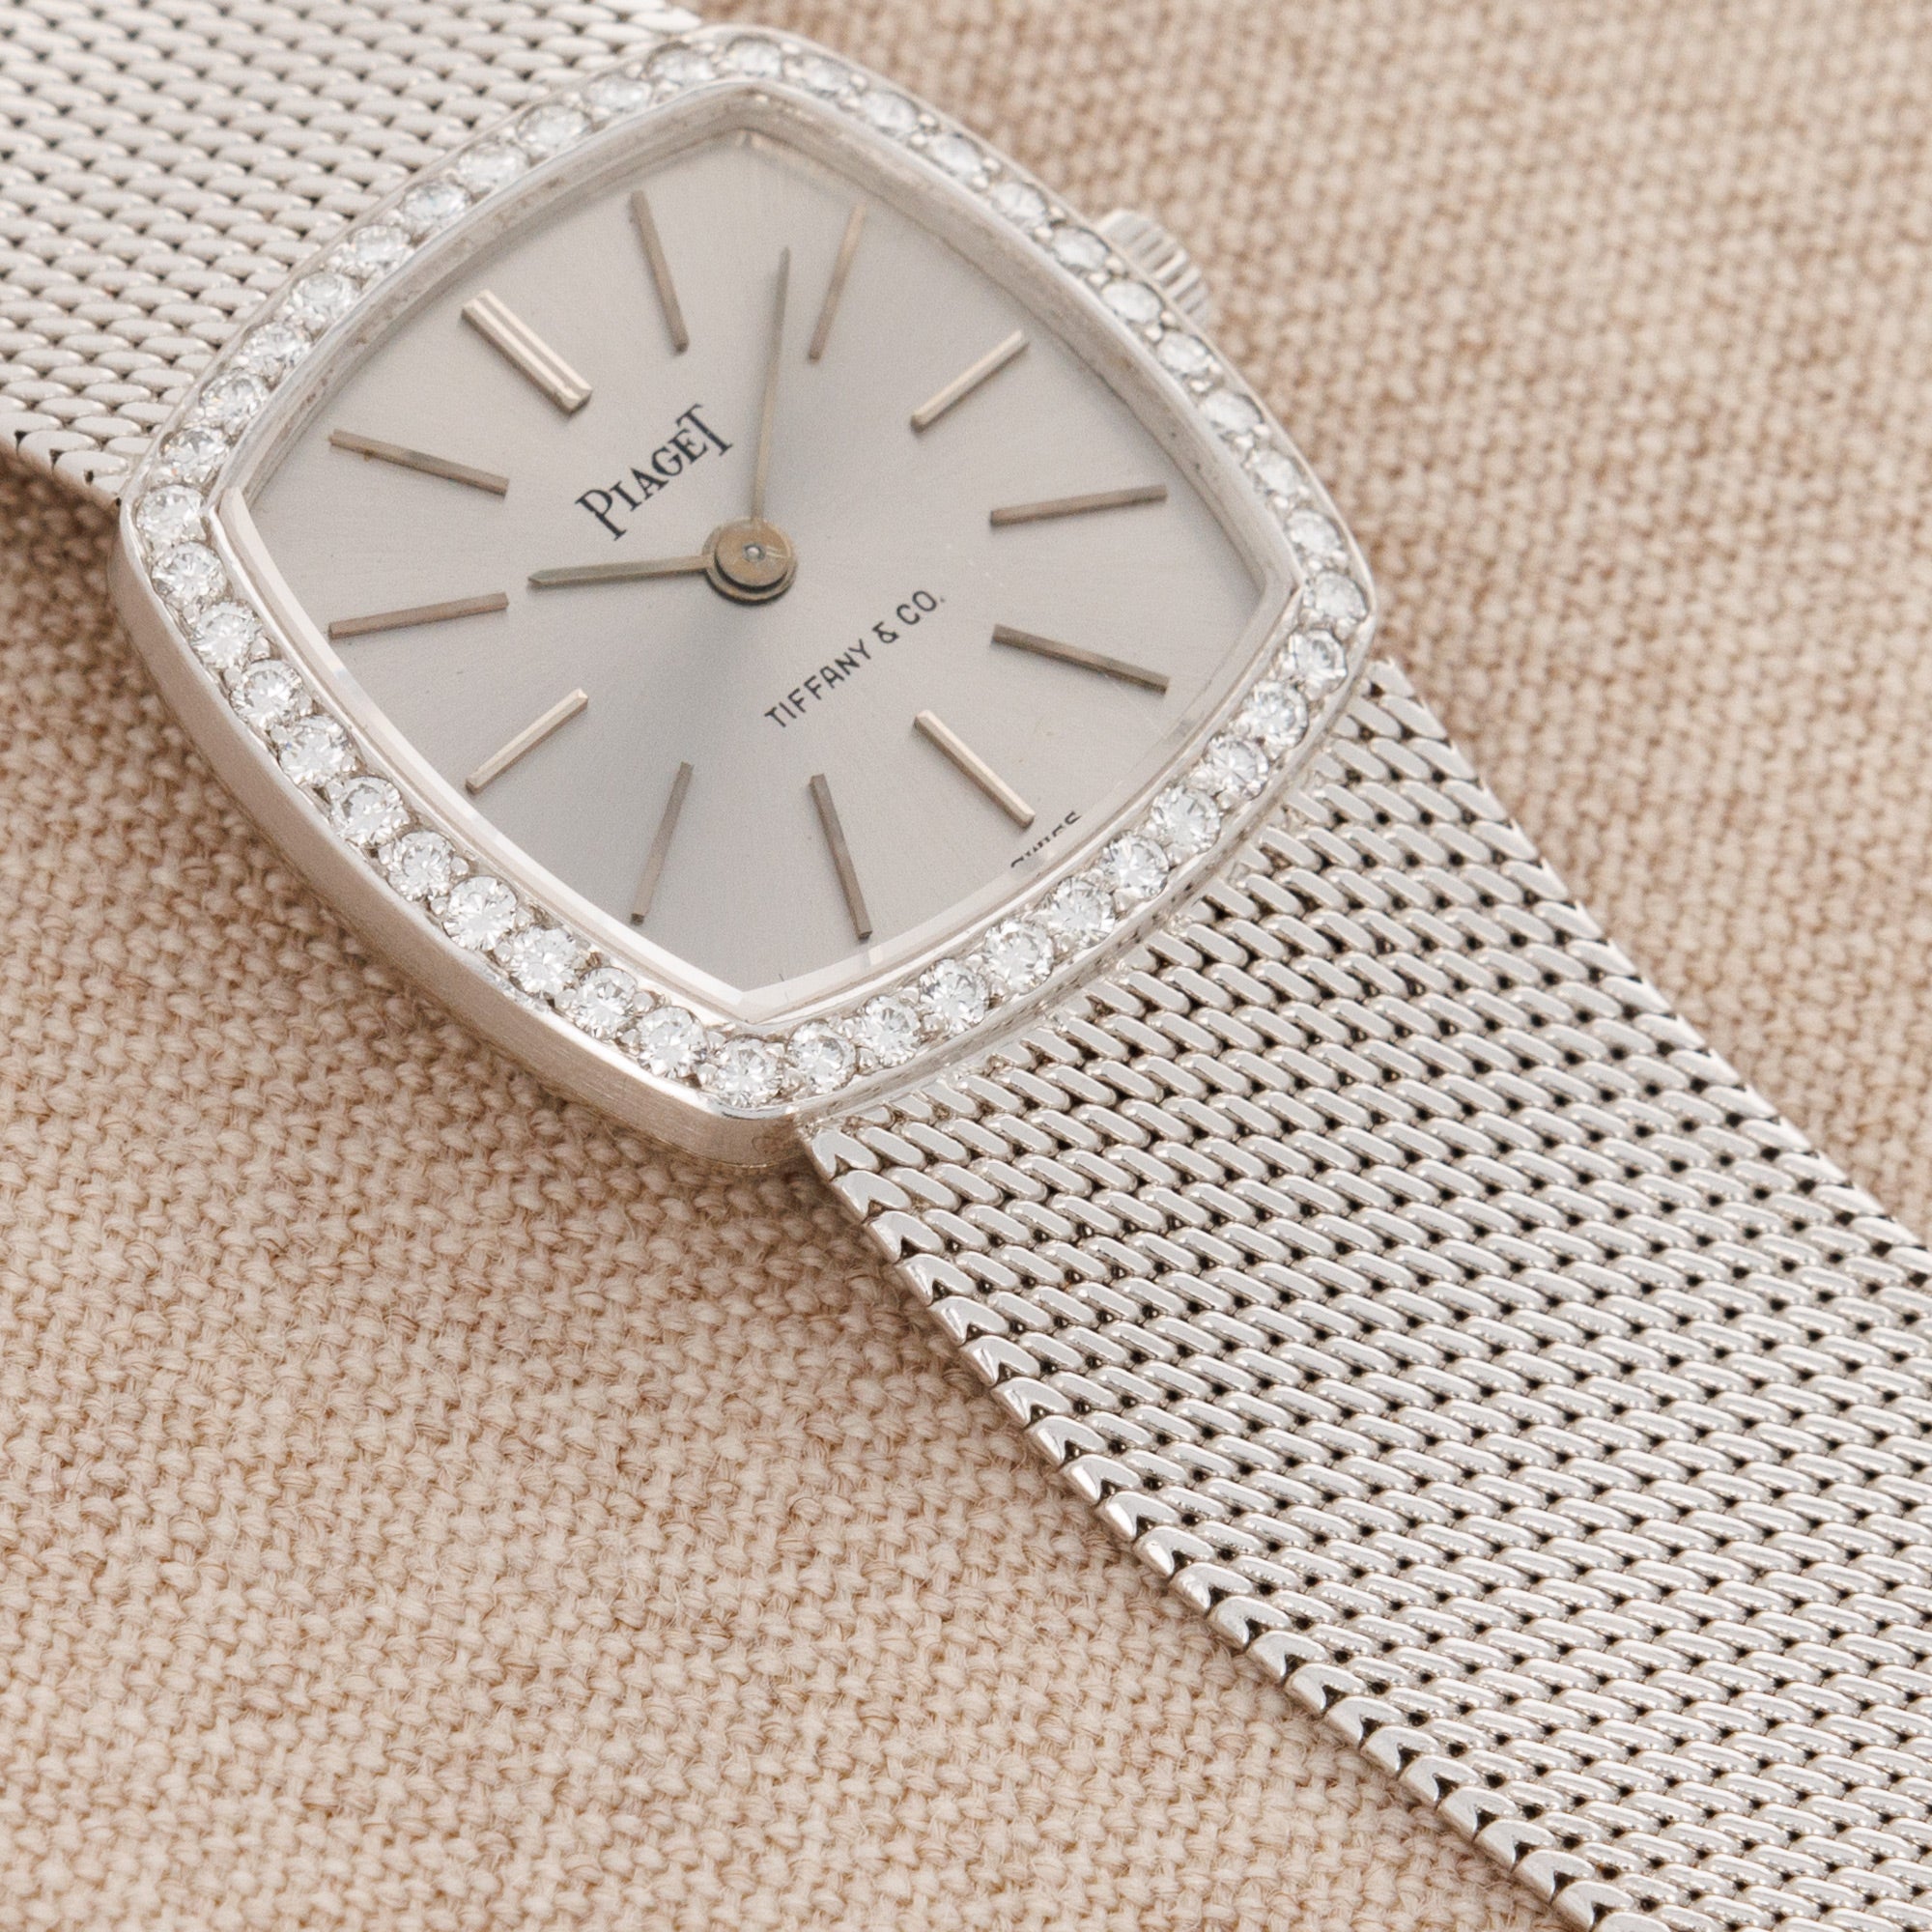 Piaget - Piaget White Gold Diamond Watch, Retailed by Tiffany &amp; Co. - The Keystone Watches